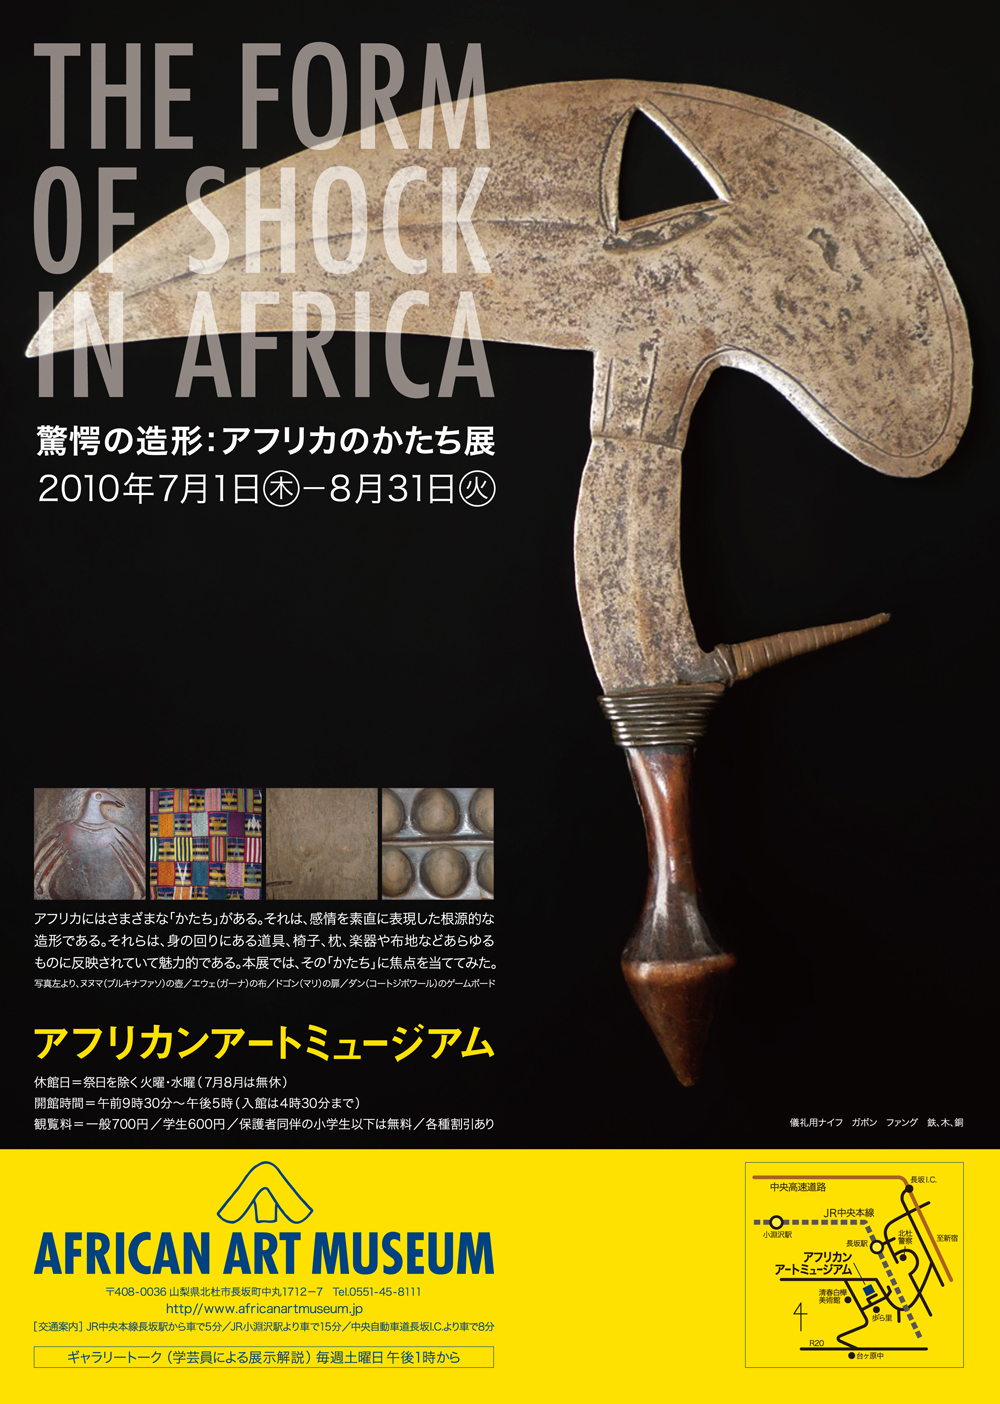 THE FORM OF SHOCK IN AFRICA